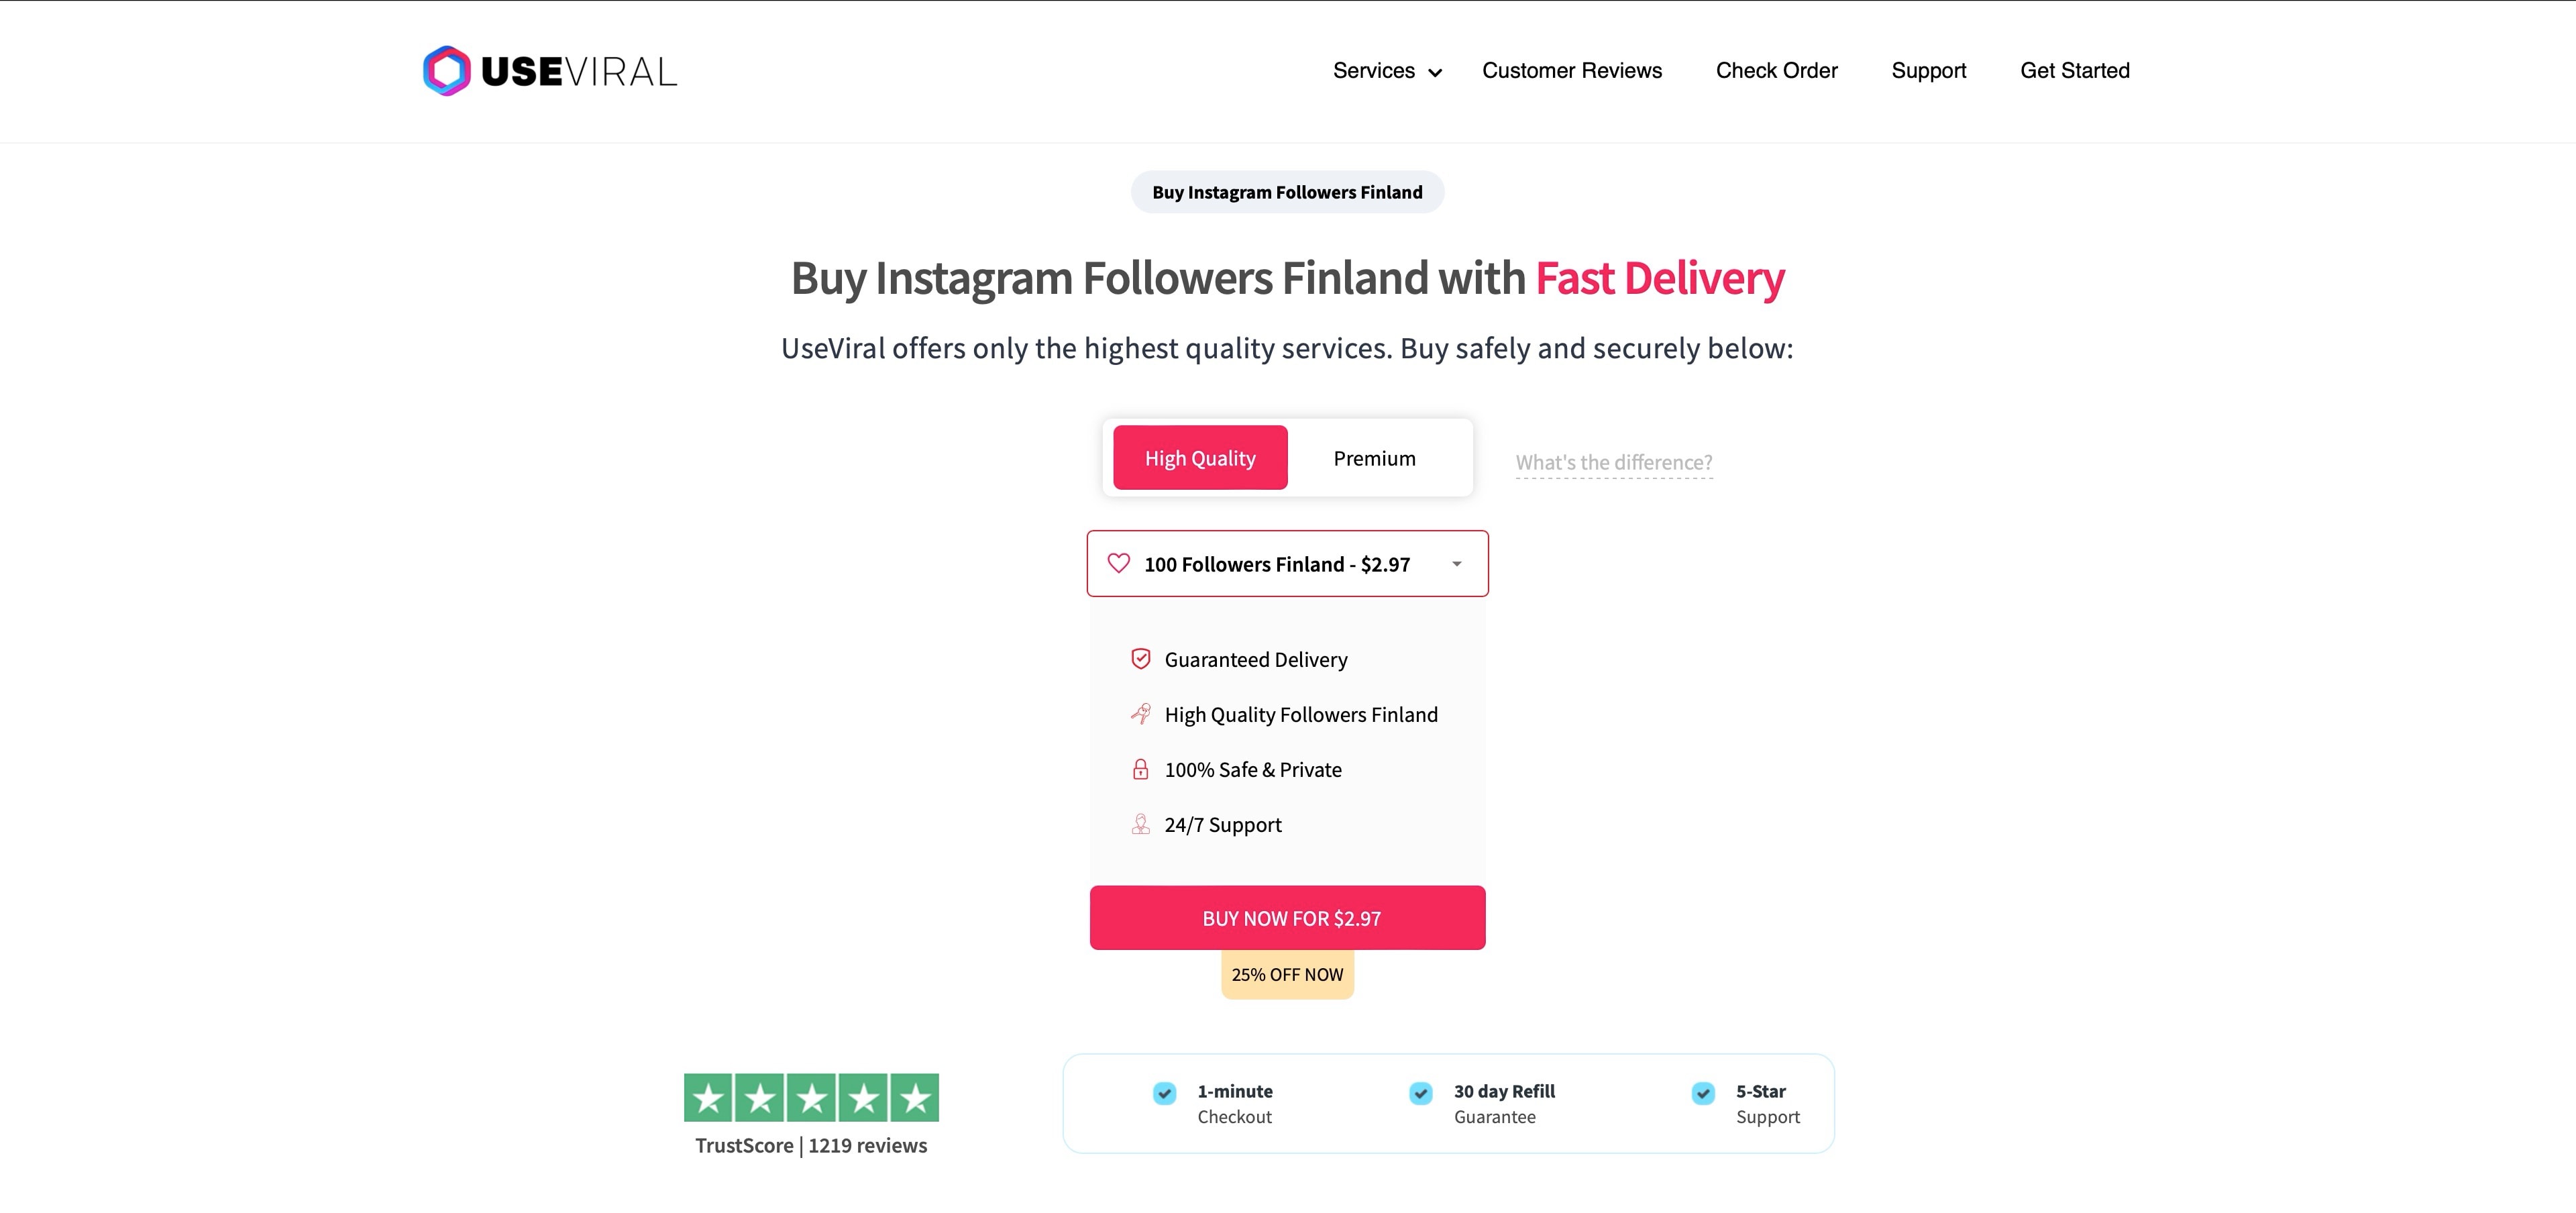 useviral buy instagram followers finland page